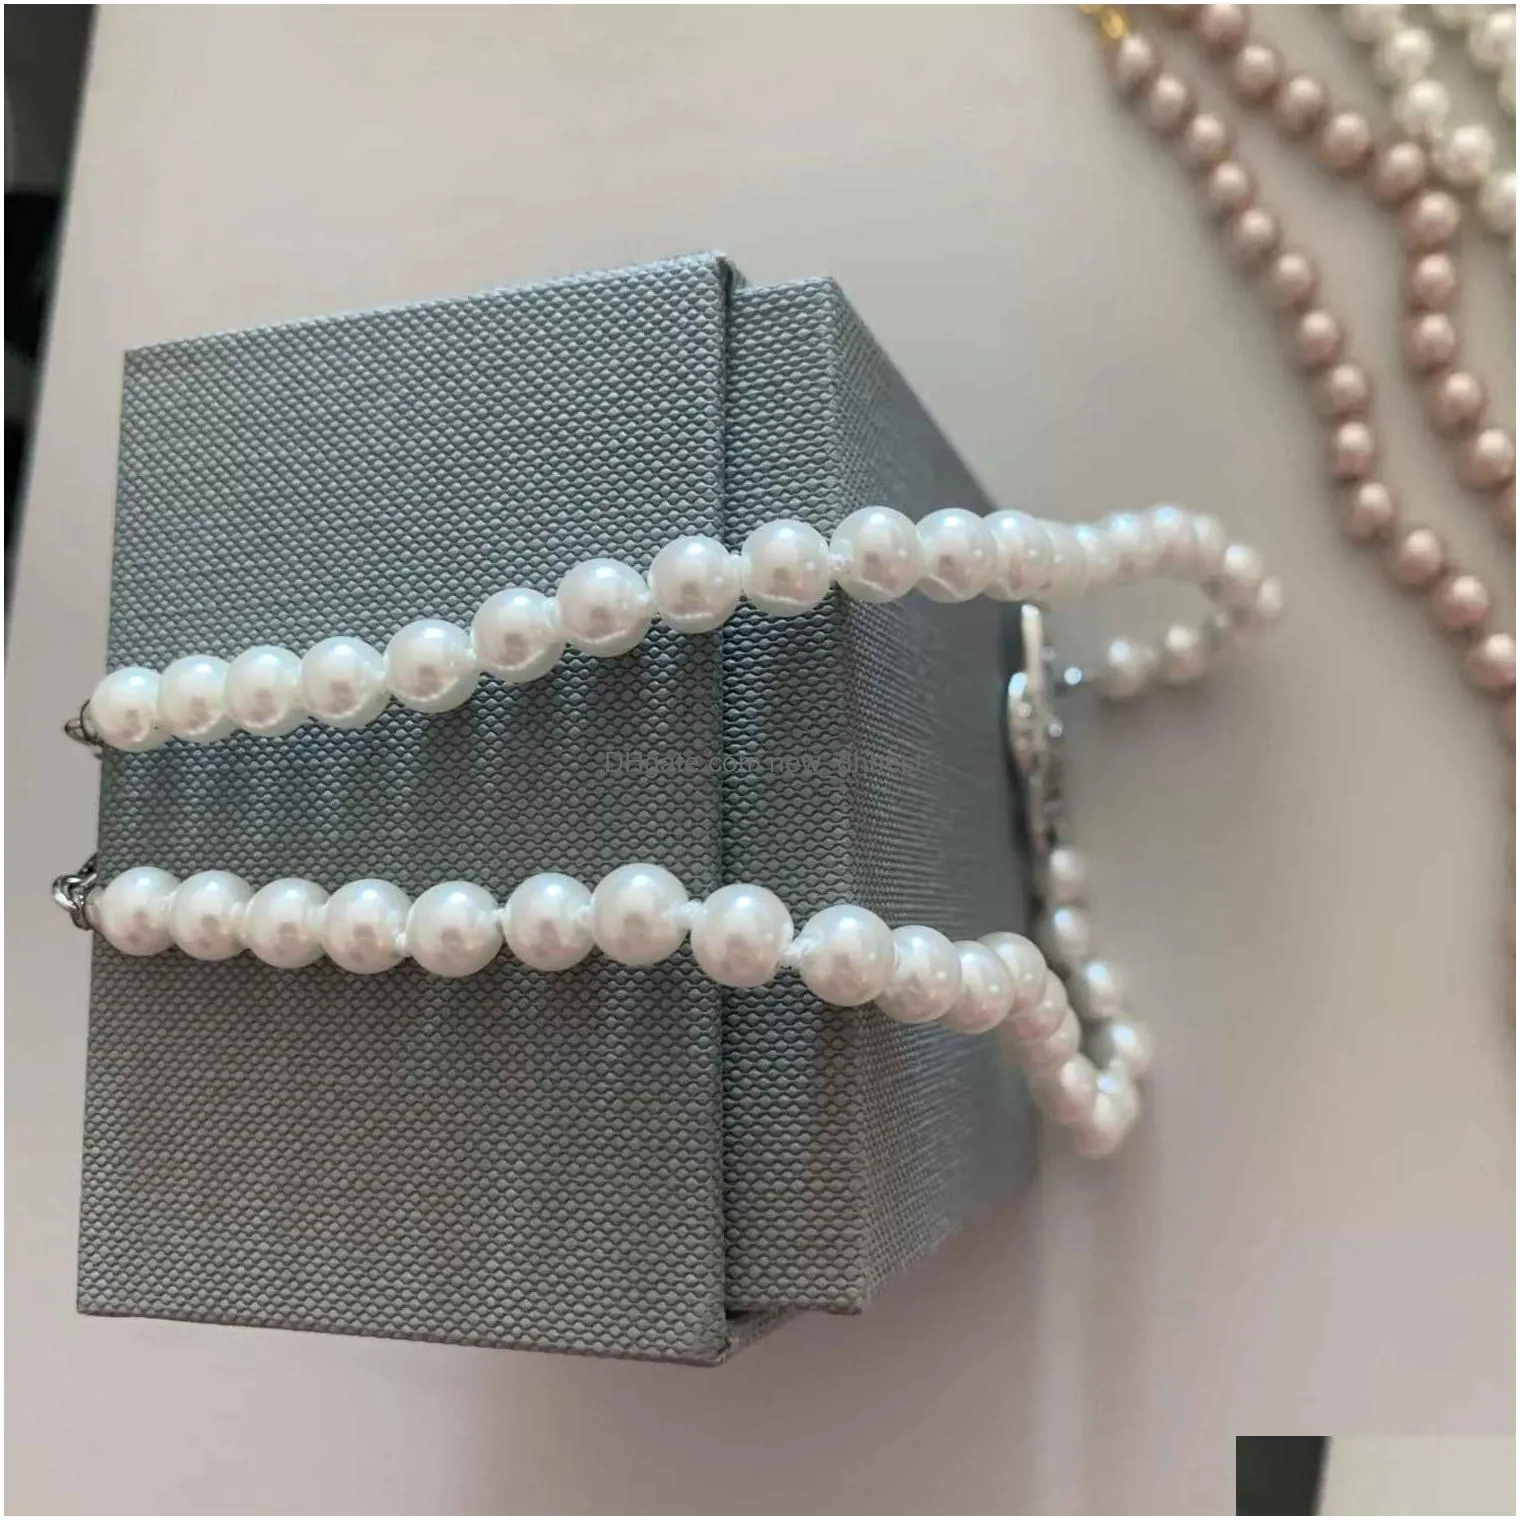 Pendant Necklaces New Fashionable Female Necklace Brand Pearl Chain Planet Satellite Clavicle Punk Atmosphere248C Drop Delivery Jewelr Dh2Es